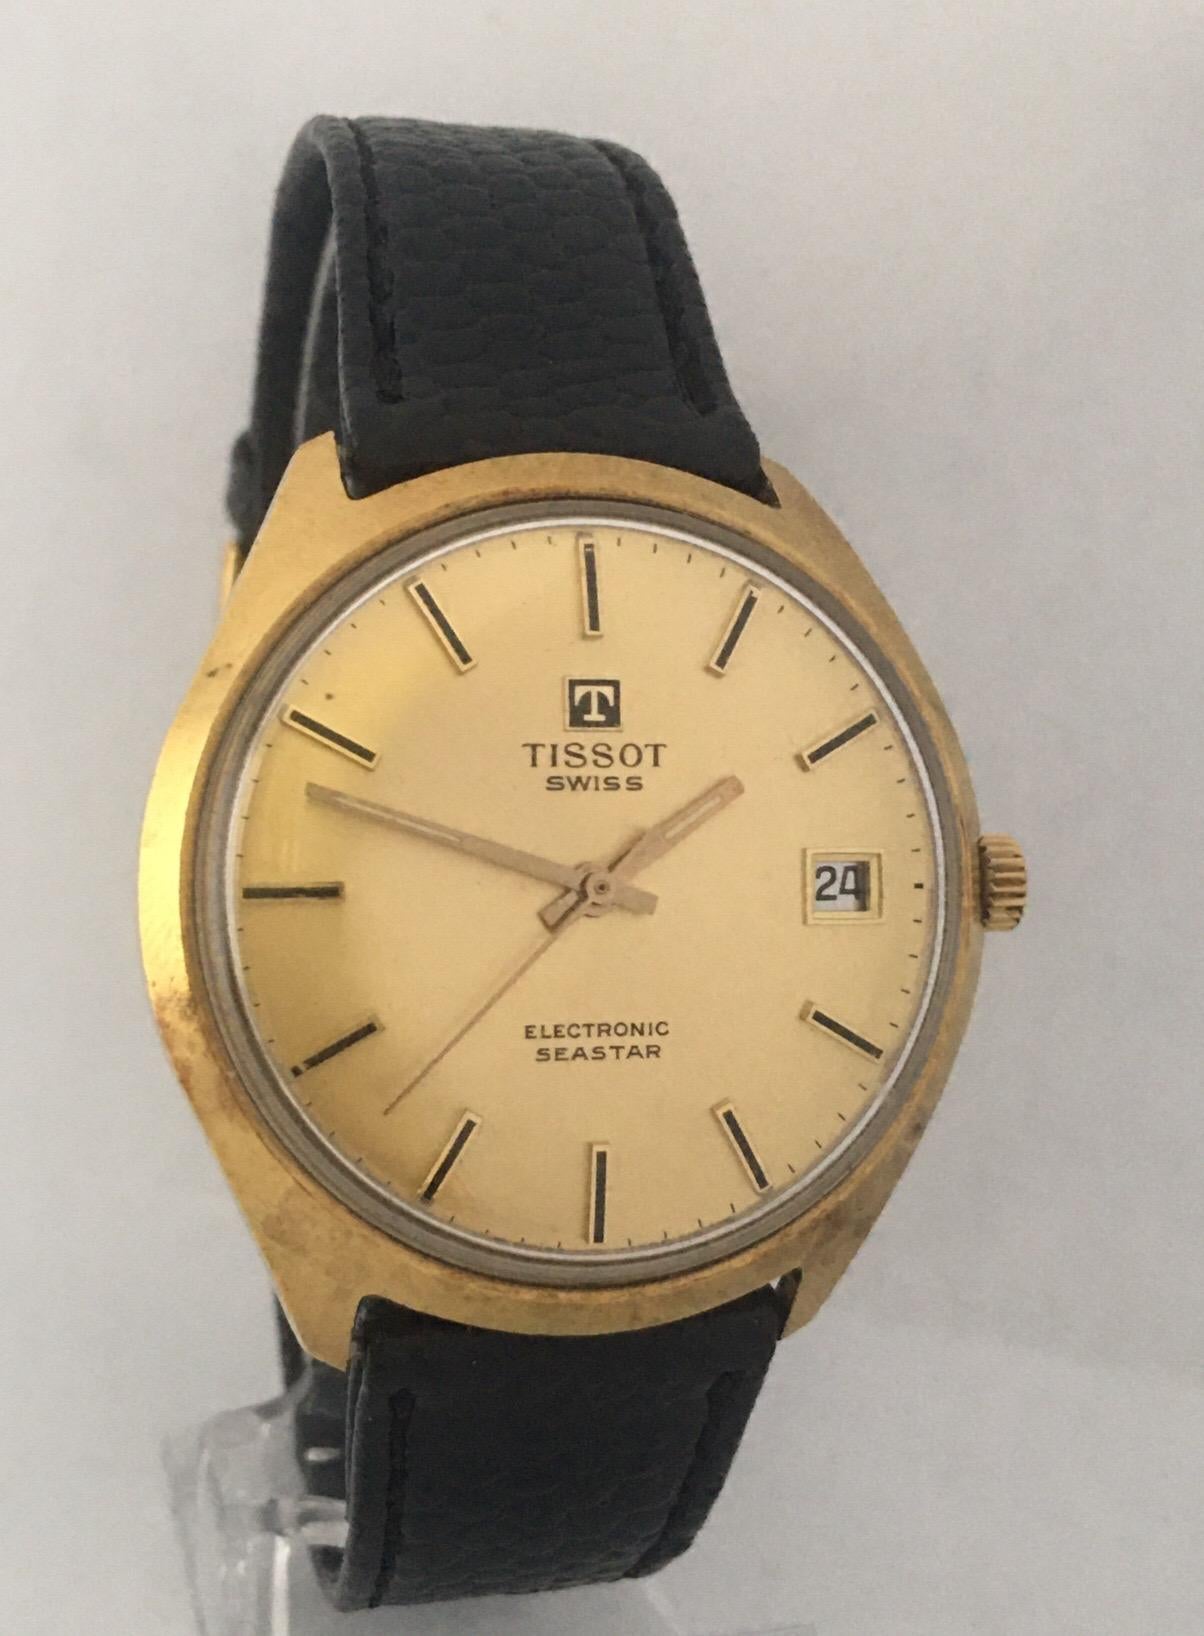 This beautiful vintage 38mm case diameter battery operated watch is working and it is running well. Visible signs of ageing and wear with light scratches on the watch case . 

Please study the images carefully as form part of the description.